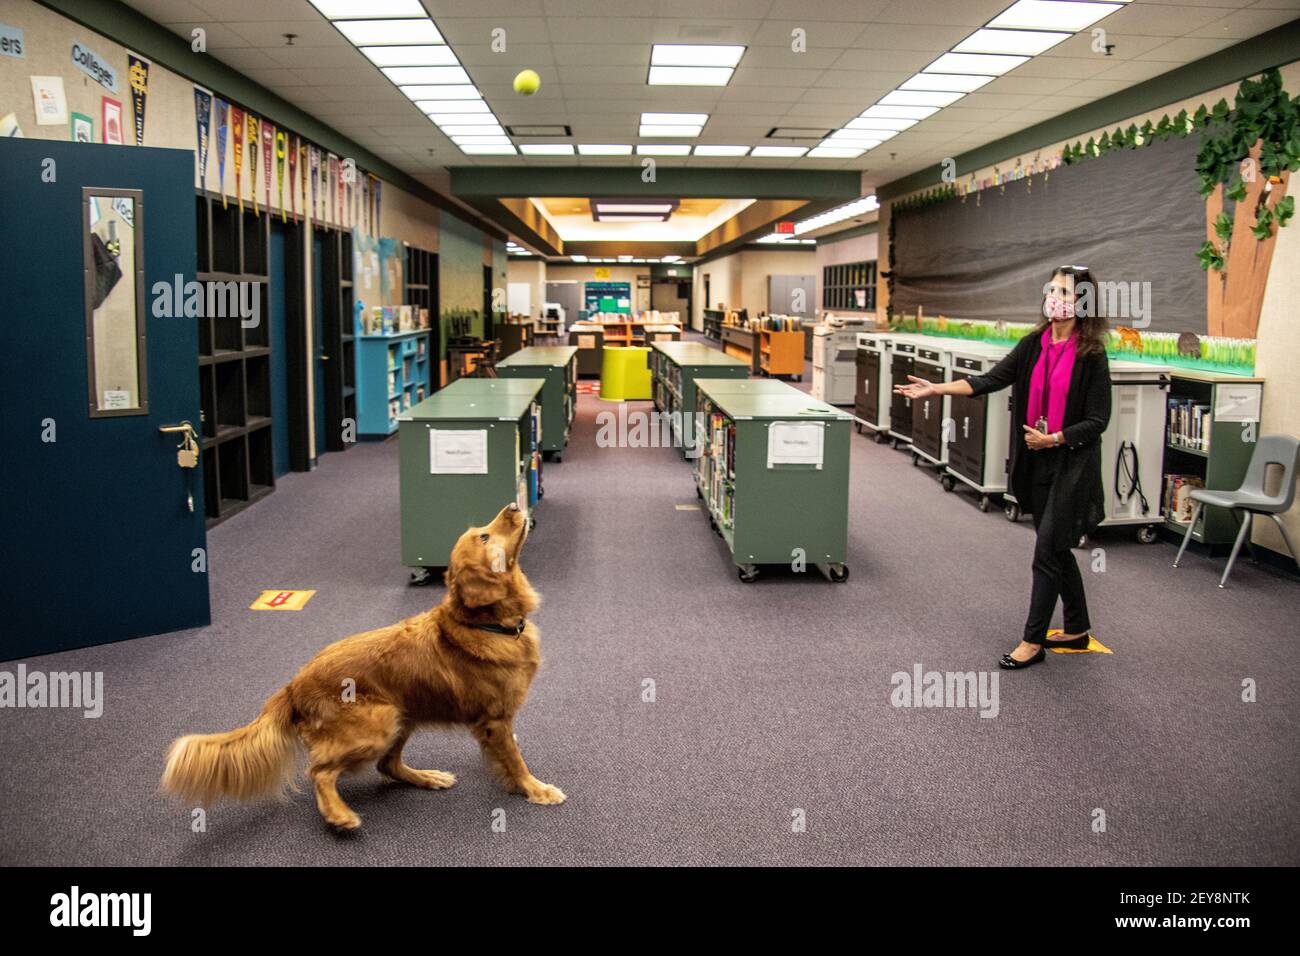 Wearing a face mask due to the coronavirus pandemic, the principal of a California elementary school tosses a tennis ball for the school's 5-year-old Golden Retriever. Stock Photo